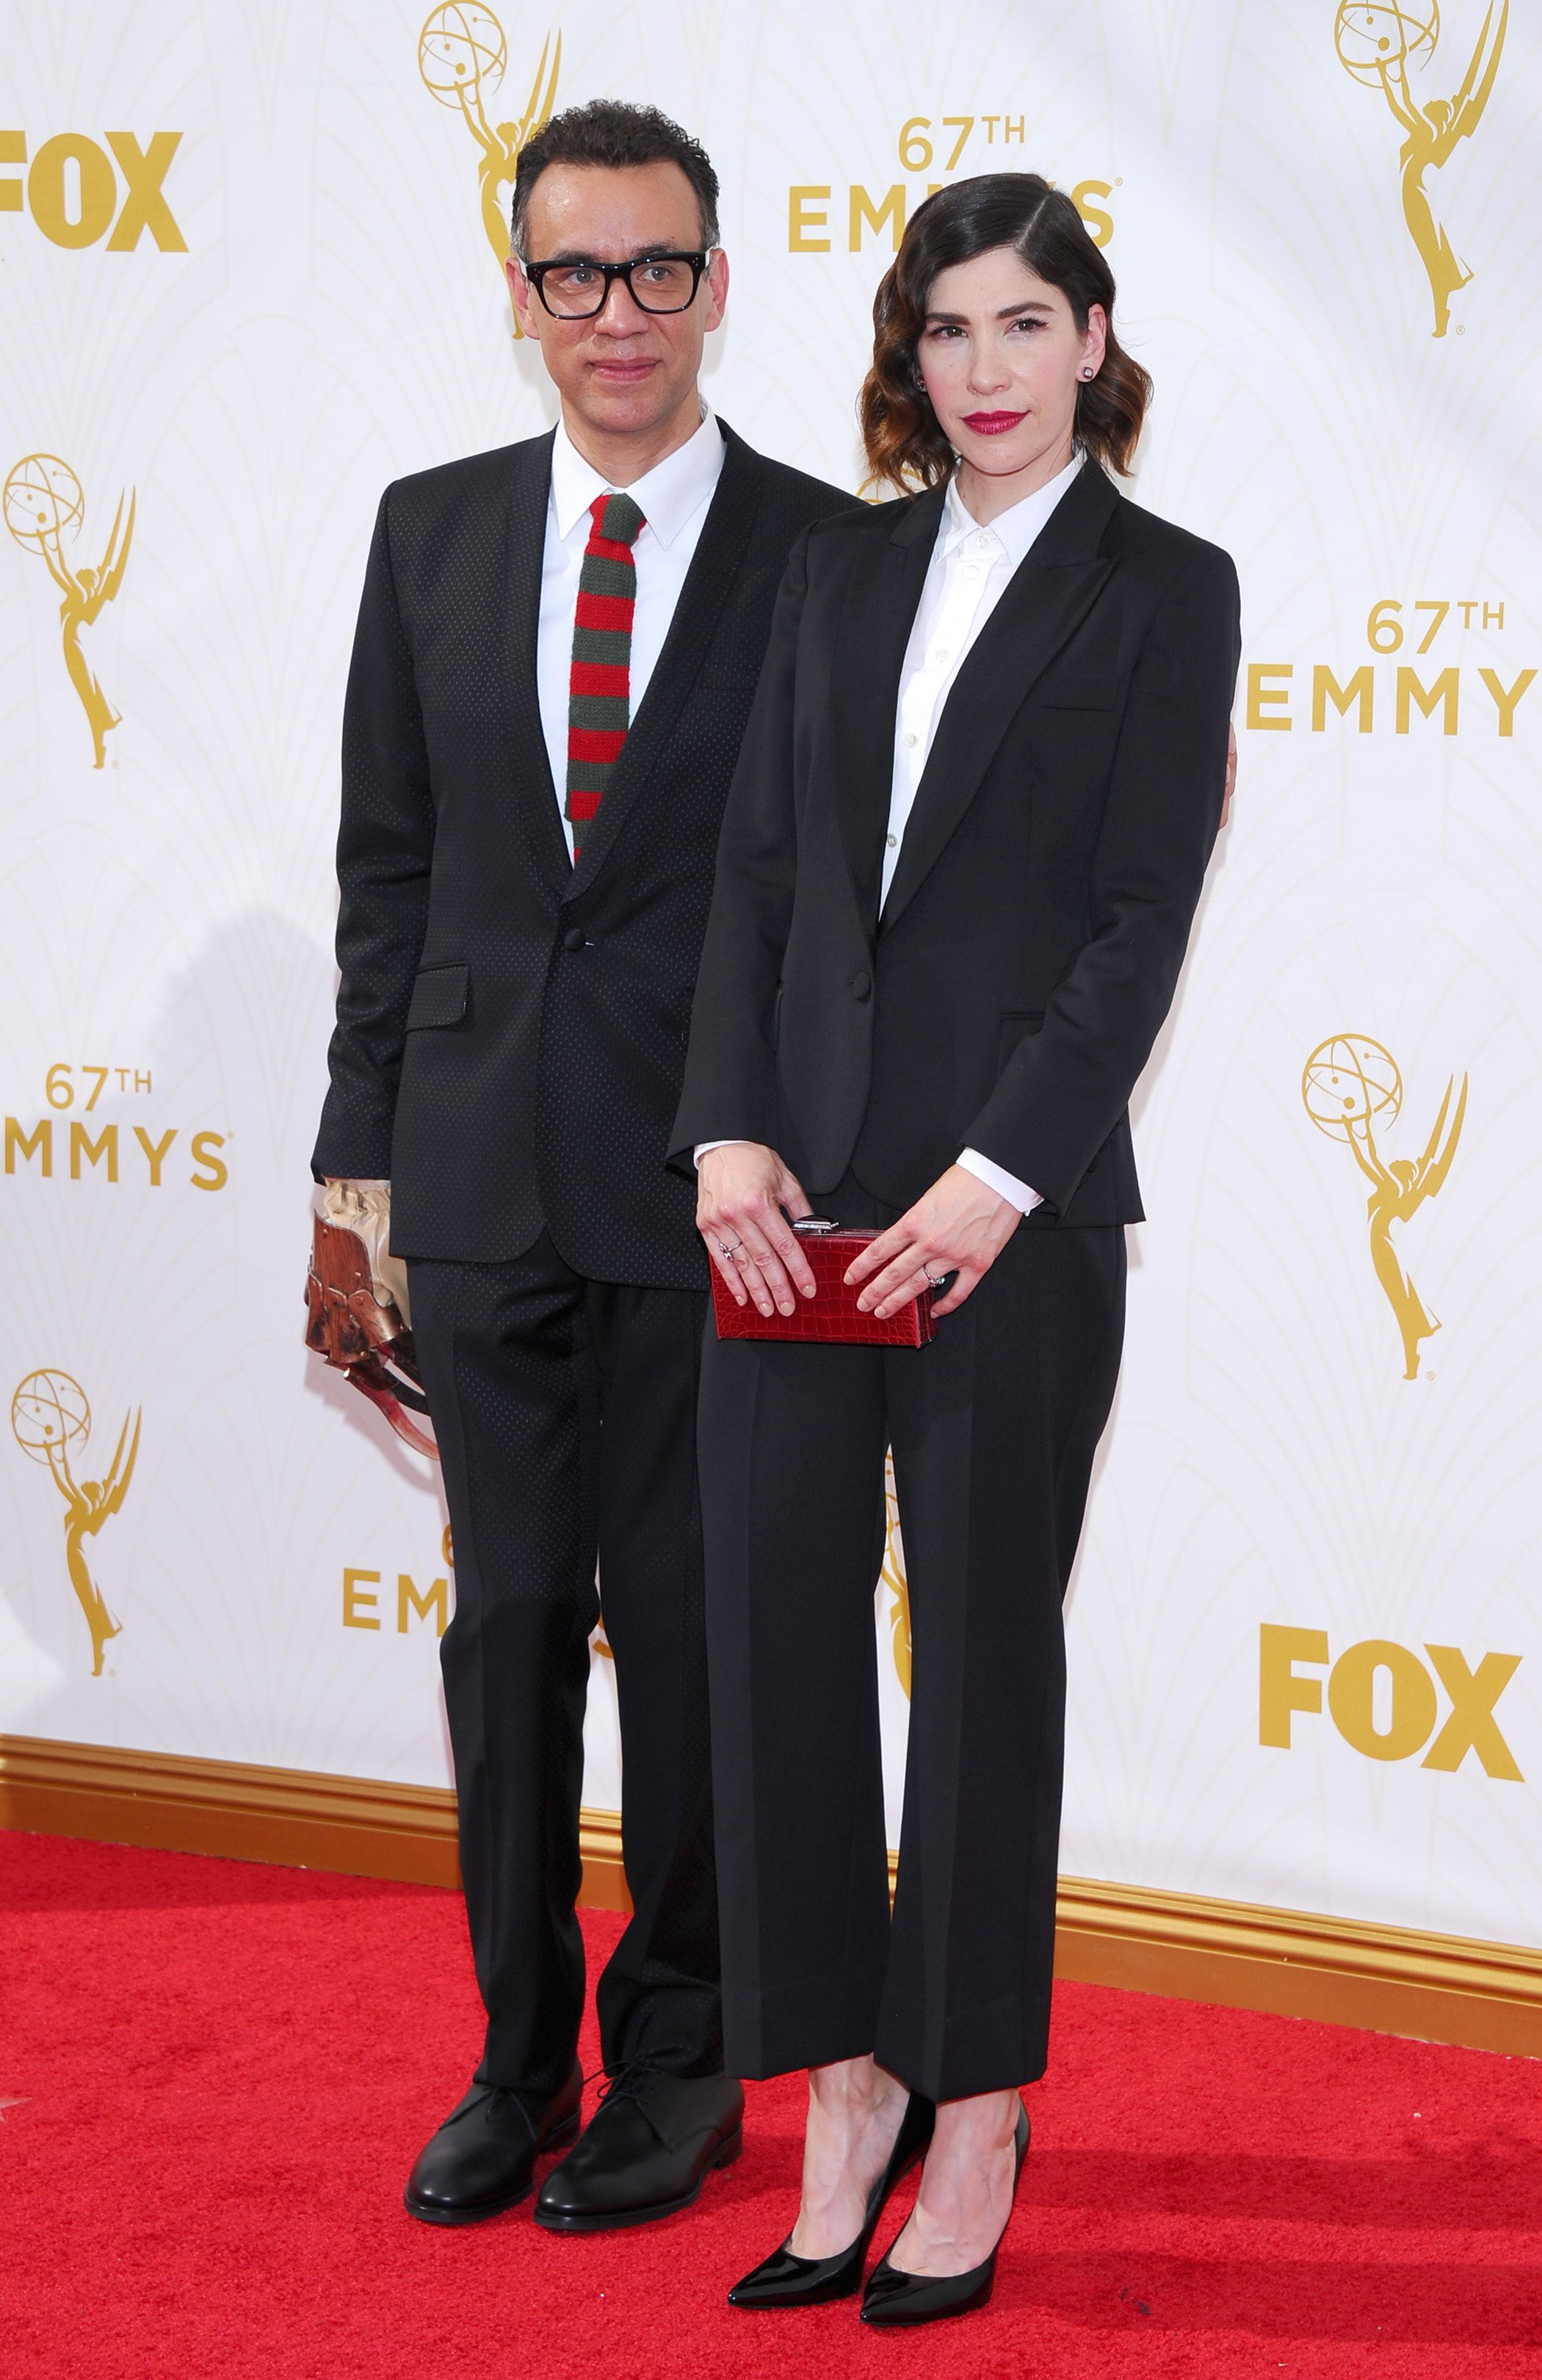 67th Emmys Awards - Fred Armisen and Carrie Brownstein - 2015